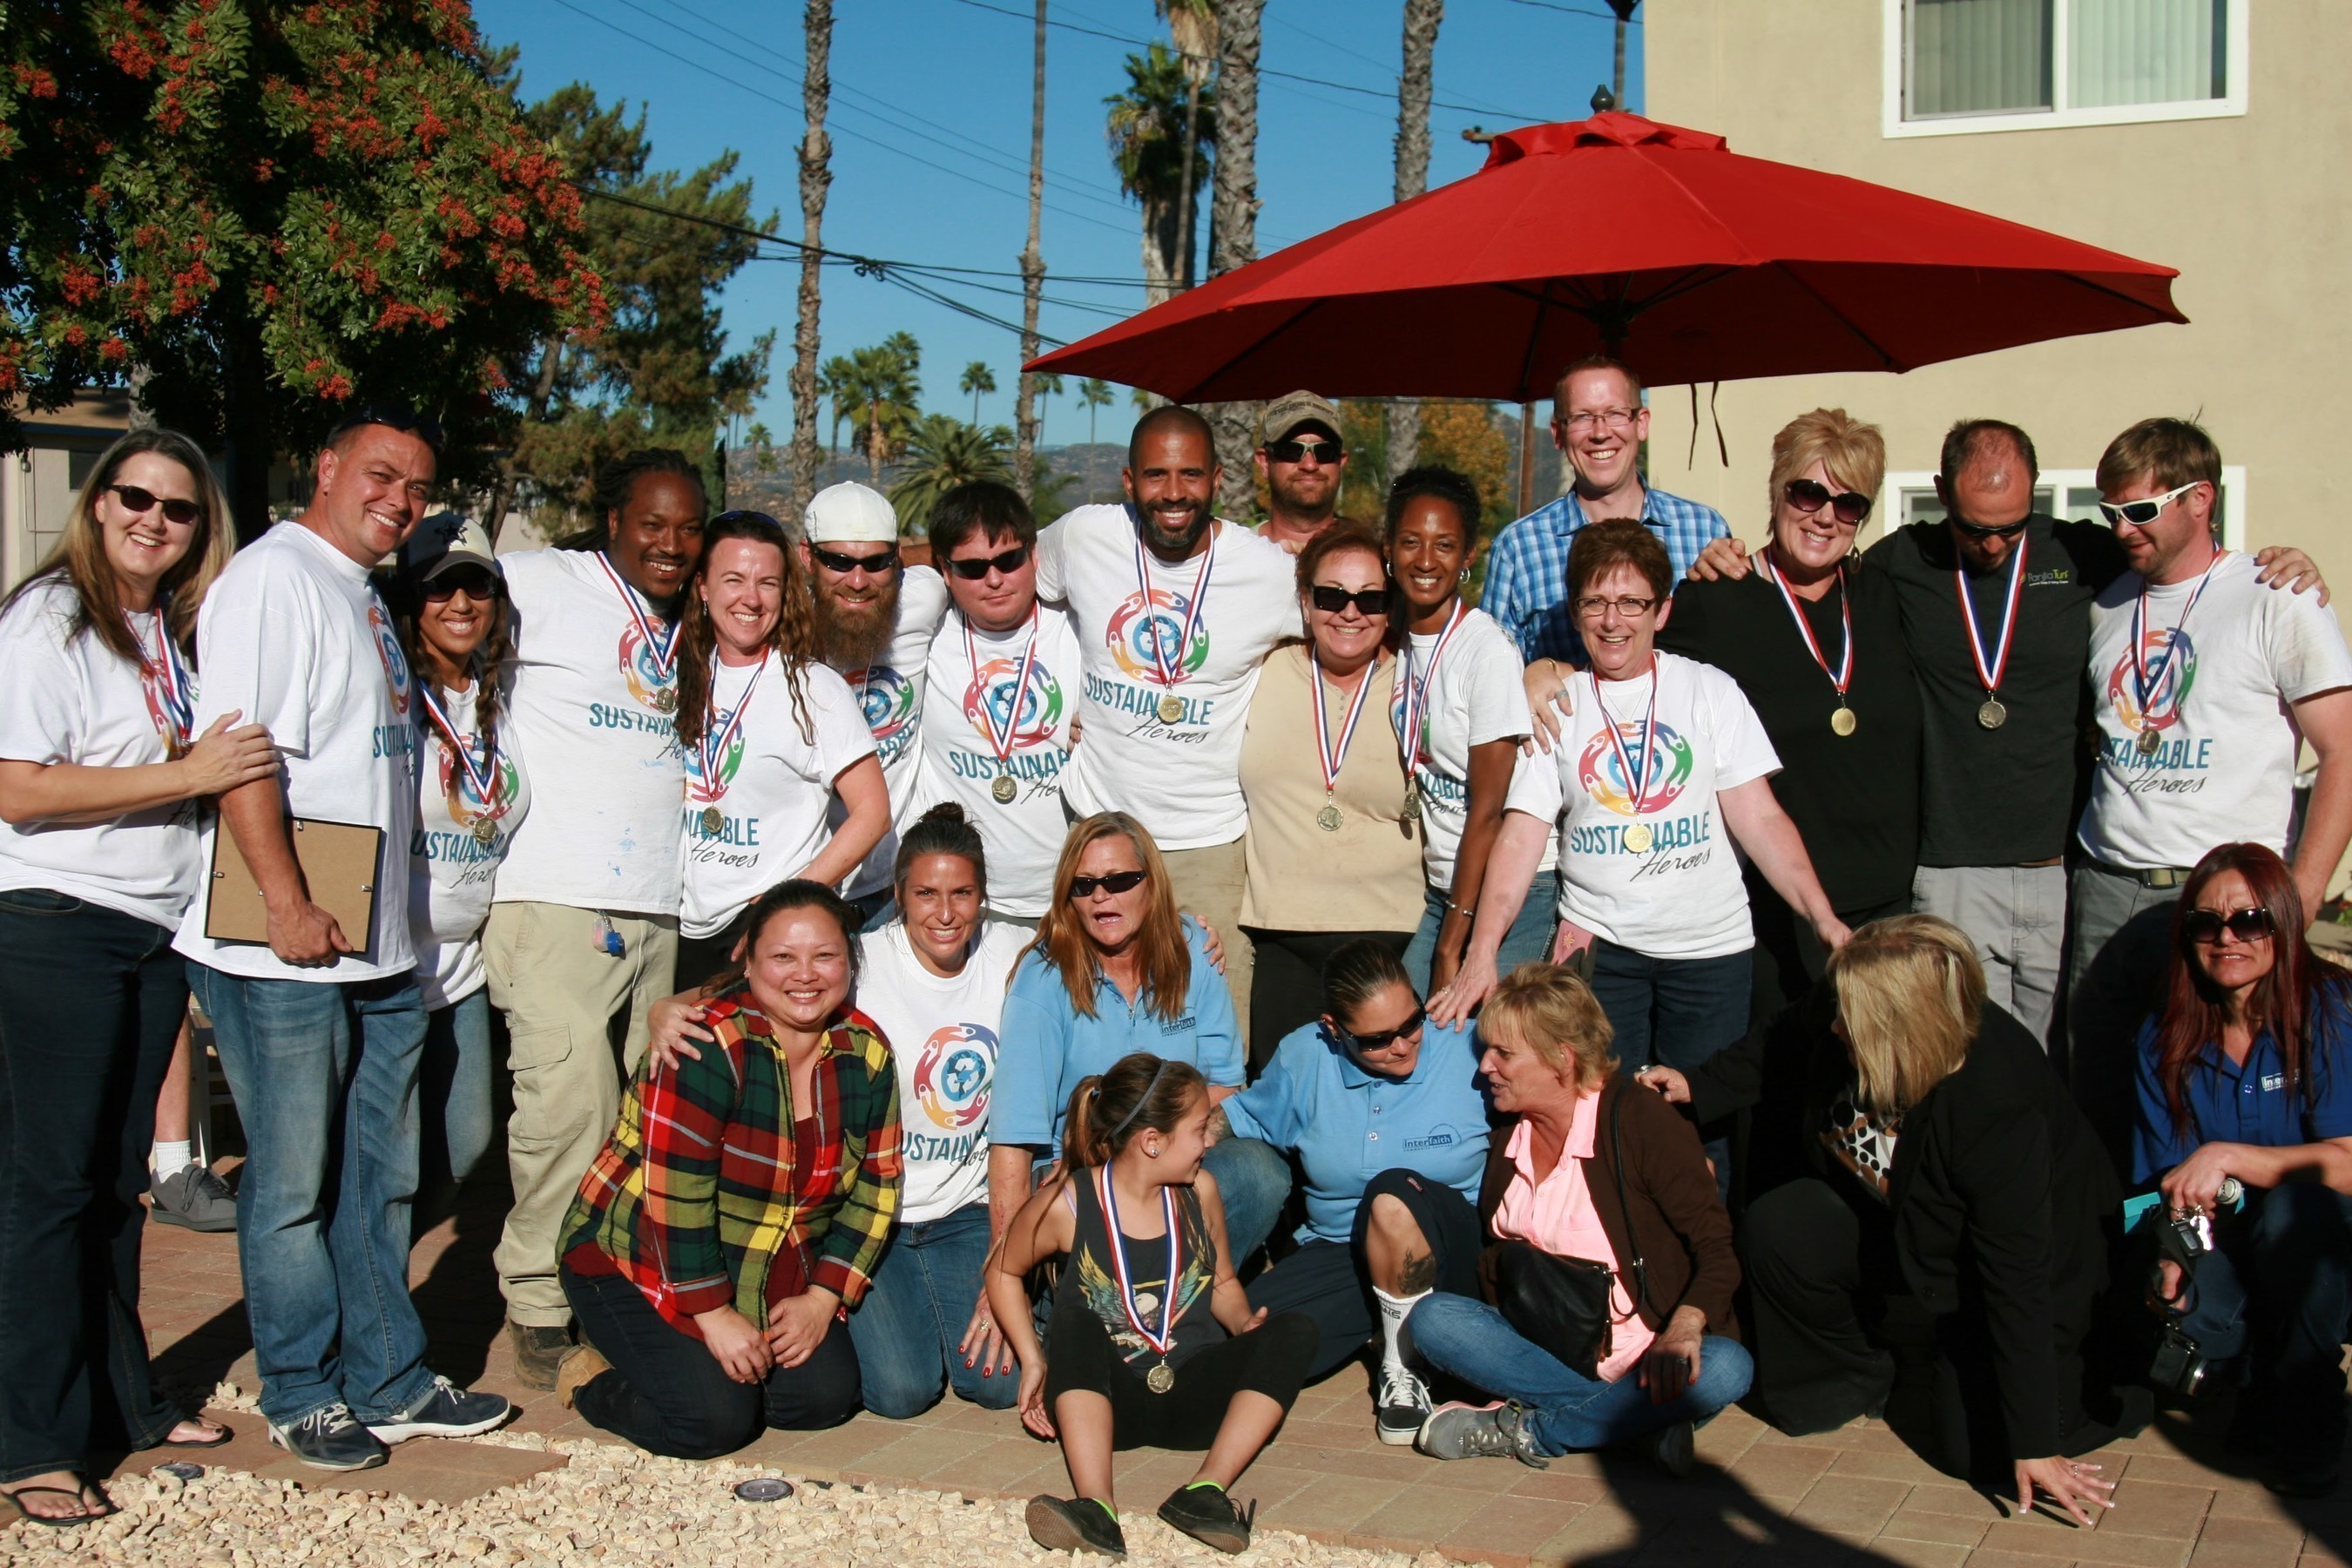 Sustainable Heroes Team Members with Interfaith Community Services partners at the Astor Street Gardens project in Escondido, California.